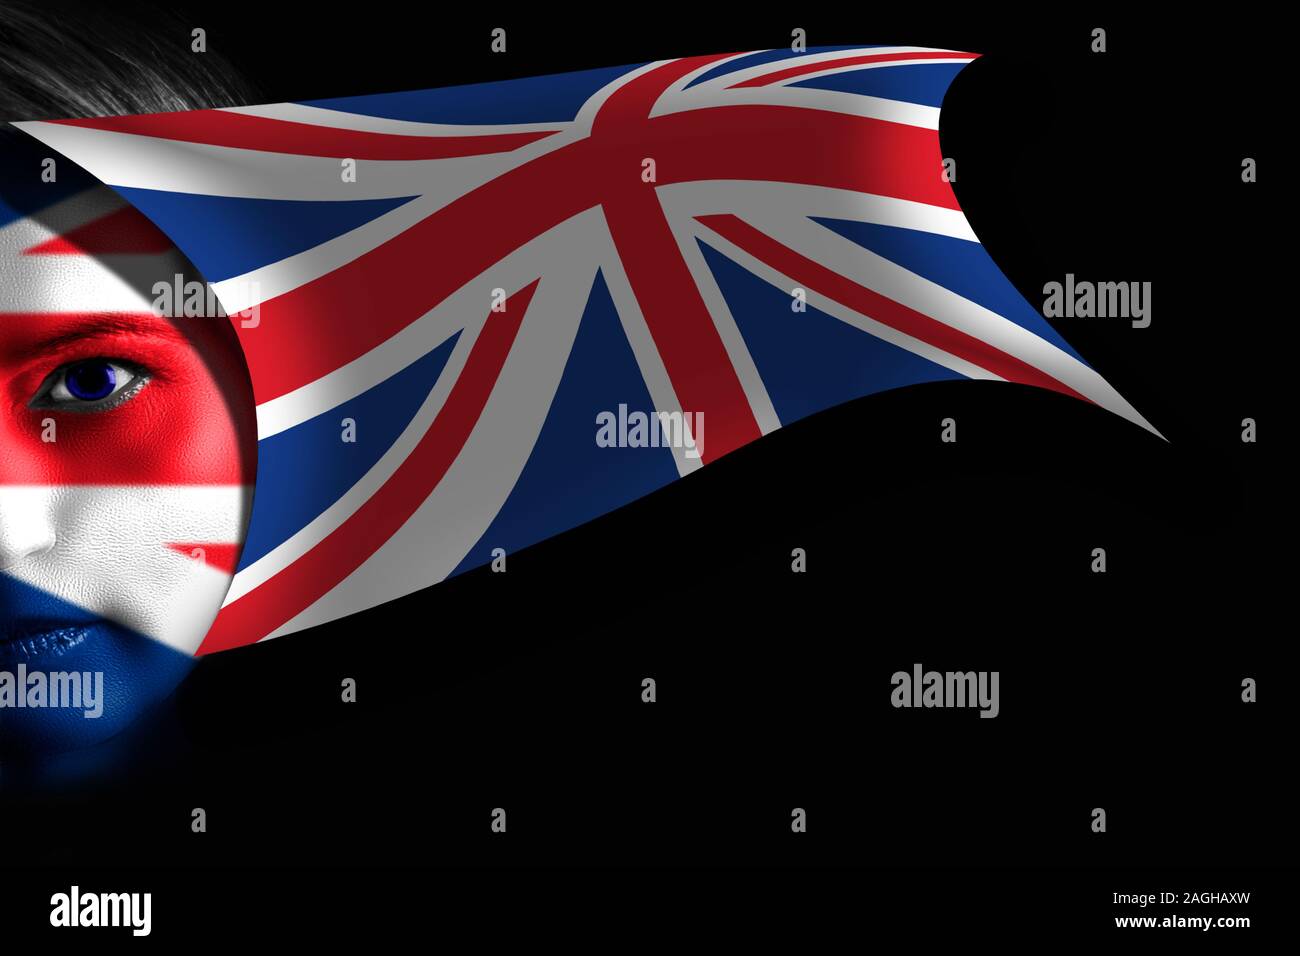 United Kingdom flag painted on human face and waving on black background. Stock Photo